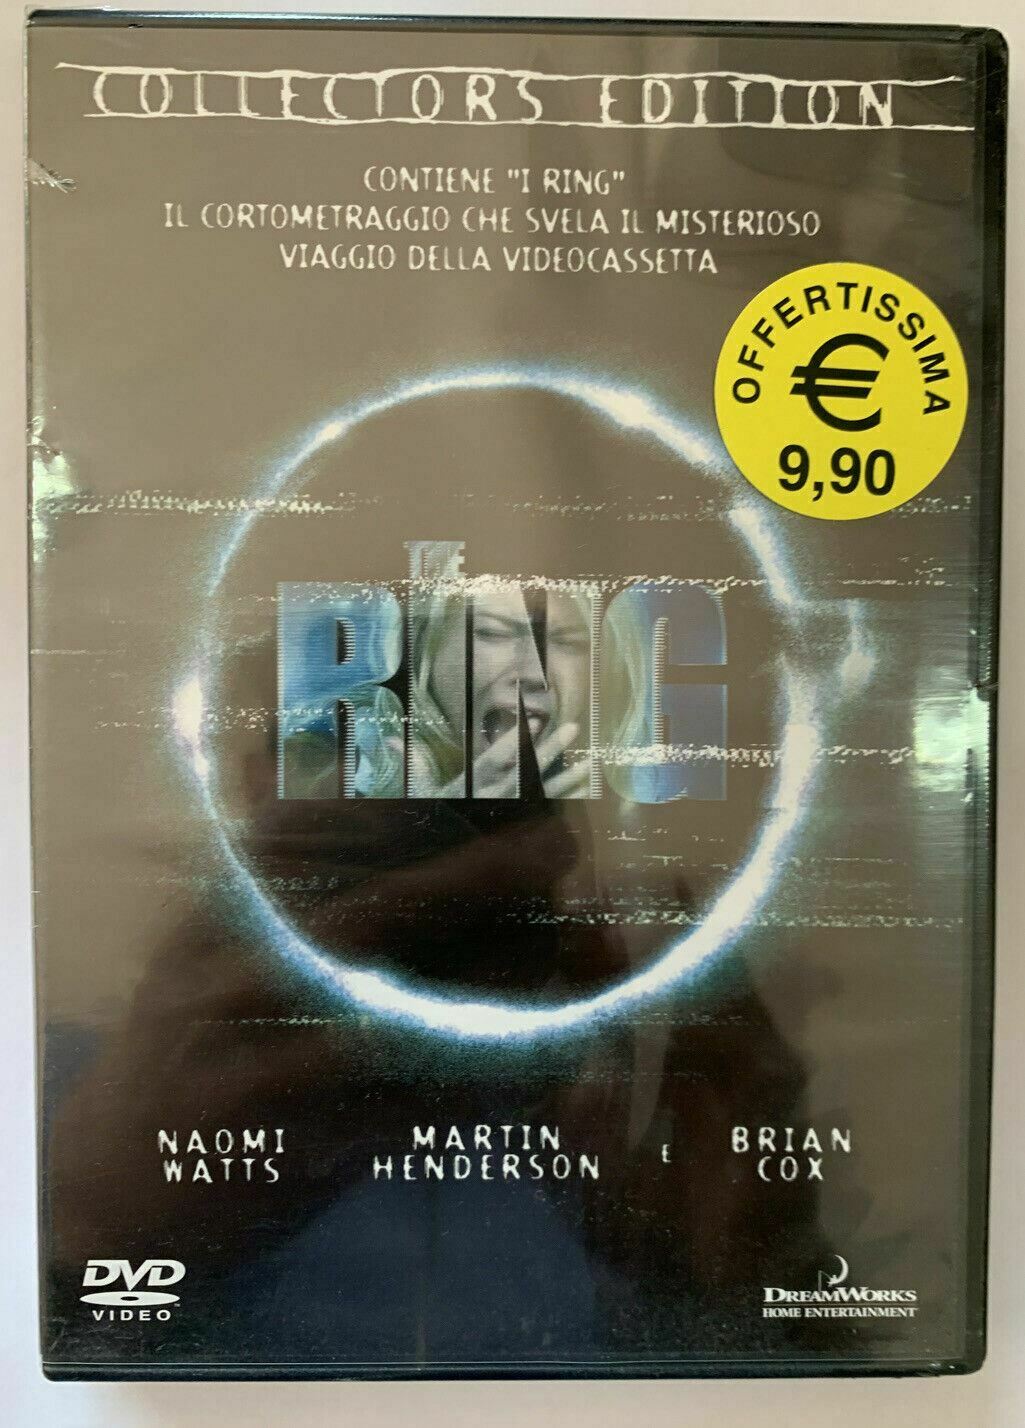 THE RING ( 2003) DVD - COLLECTOR'S  EDITION - NAOMI WATTS